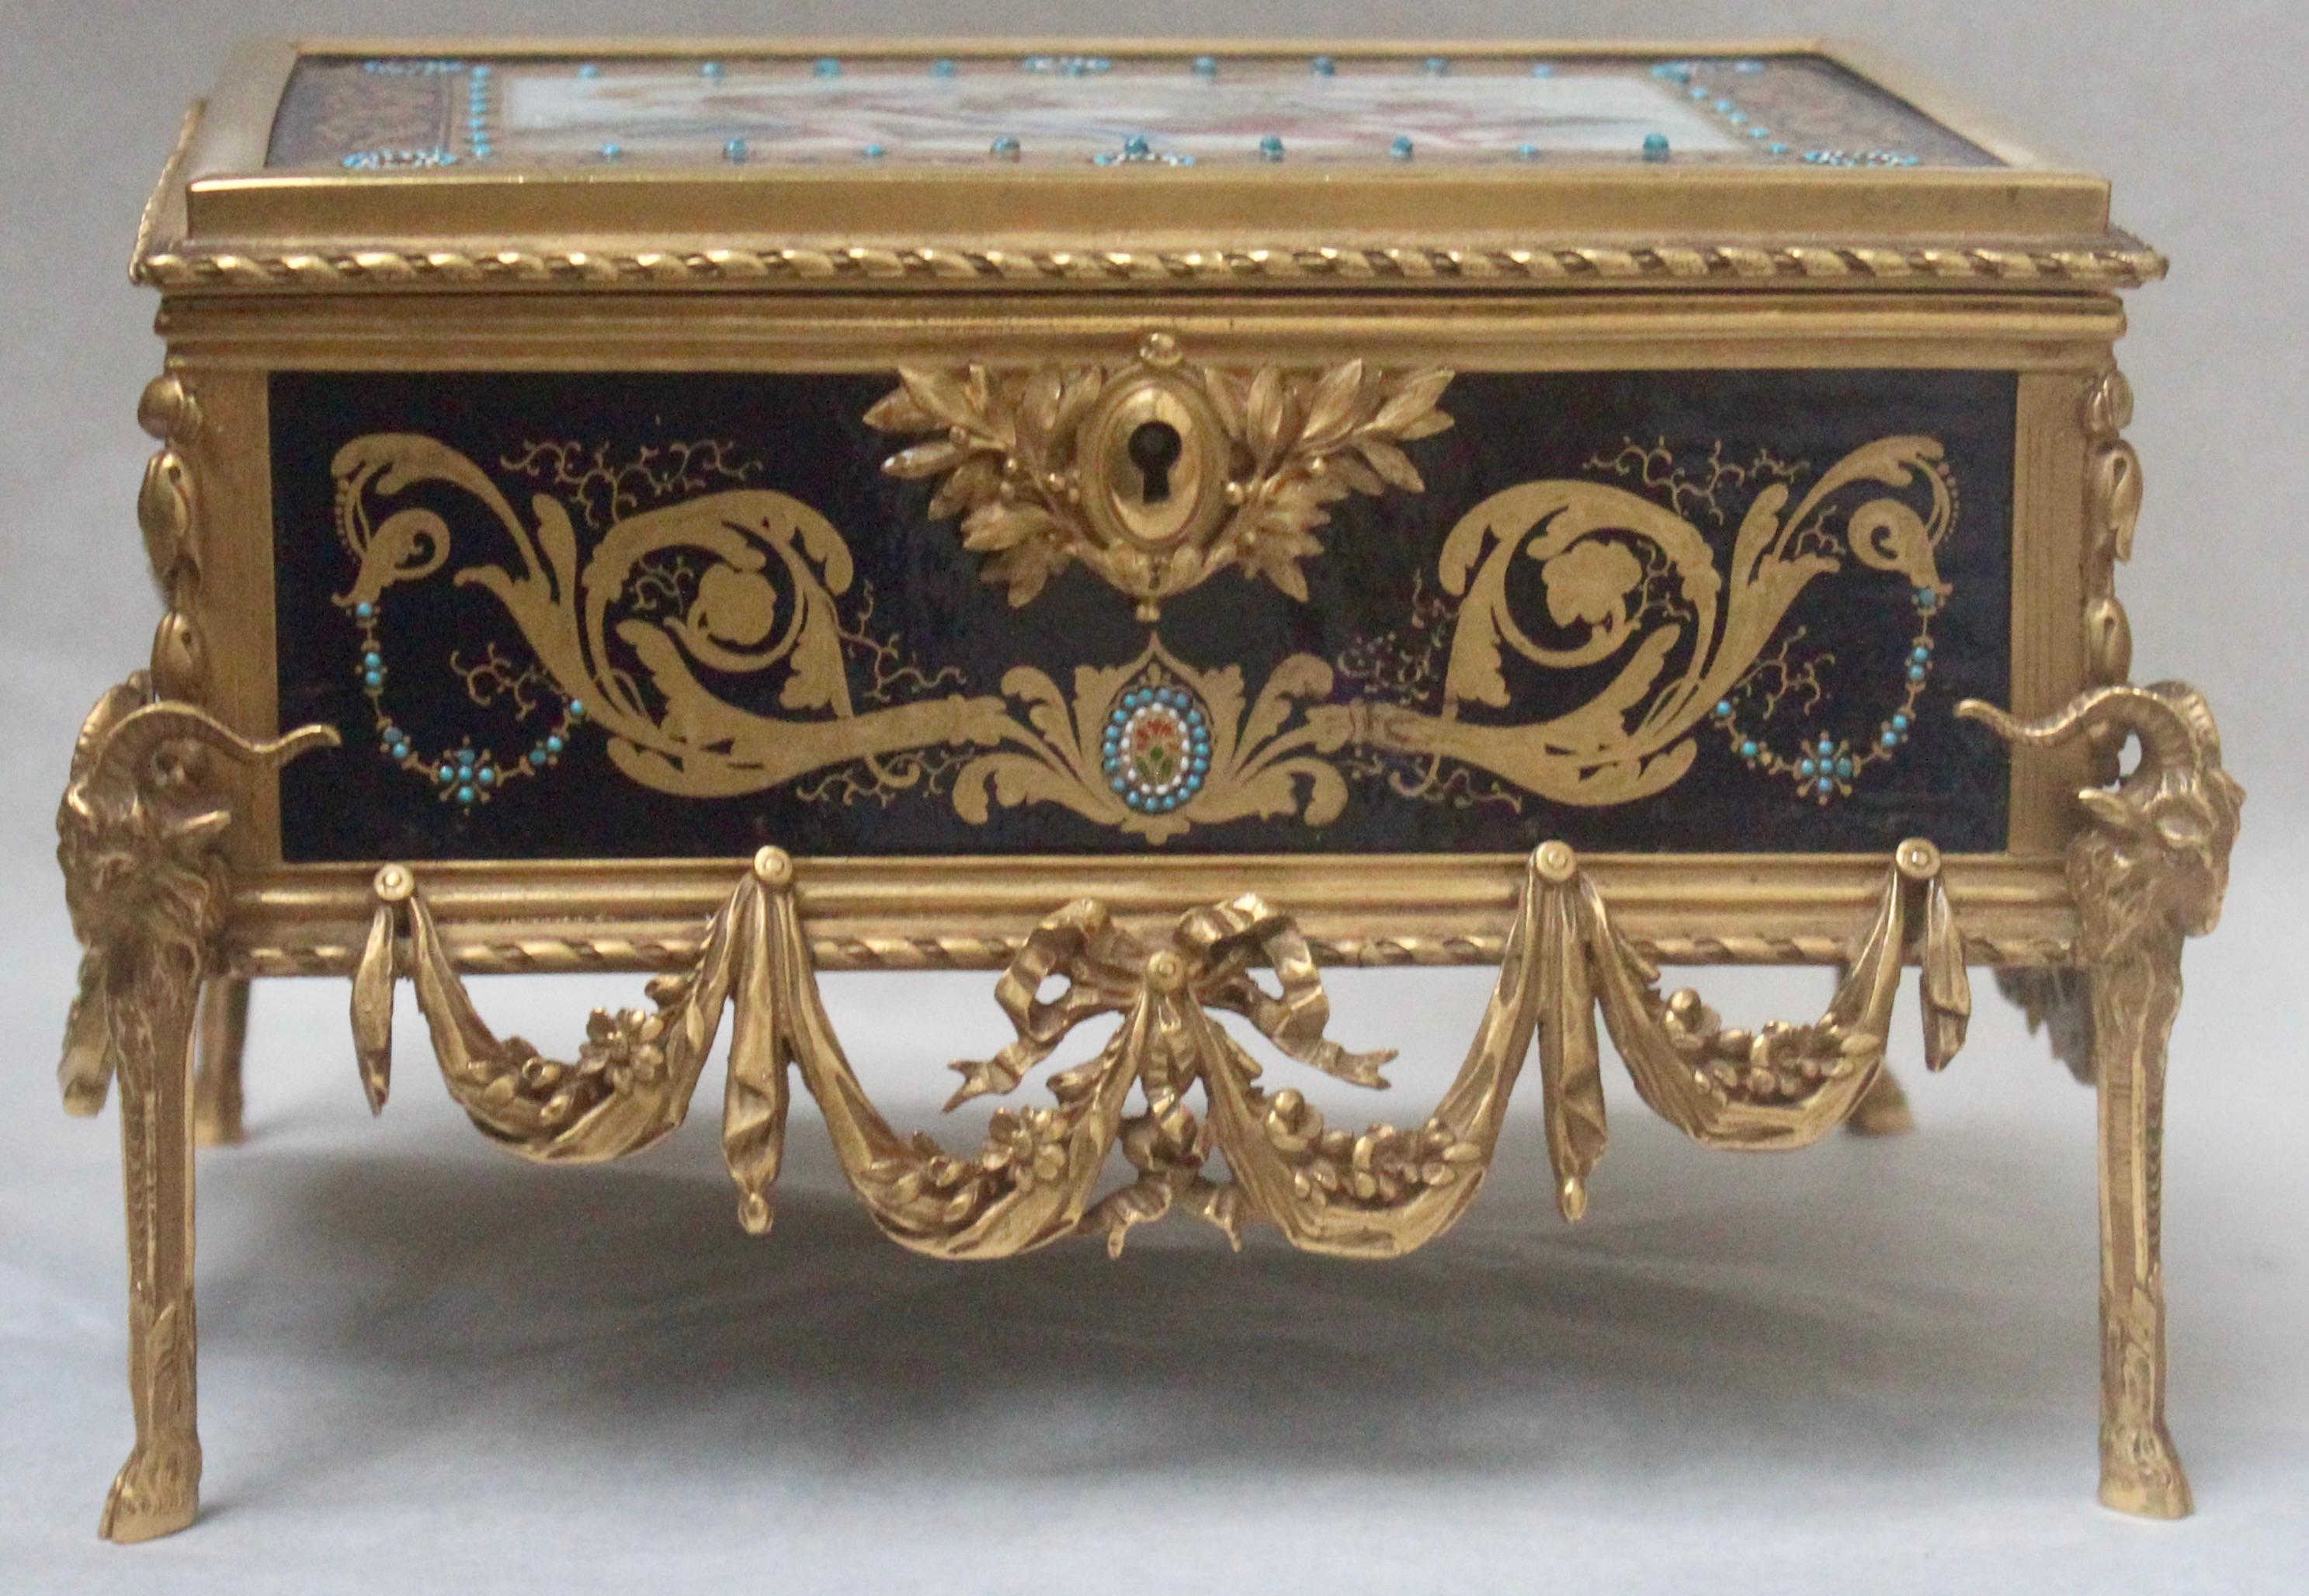 French 19th Century Enameled and Ormolu-Mounted Jewelry Casket 3